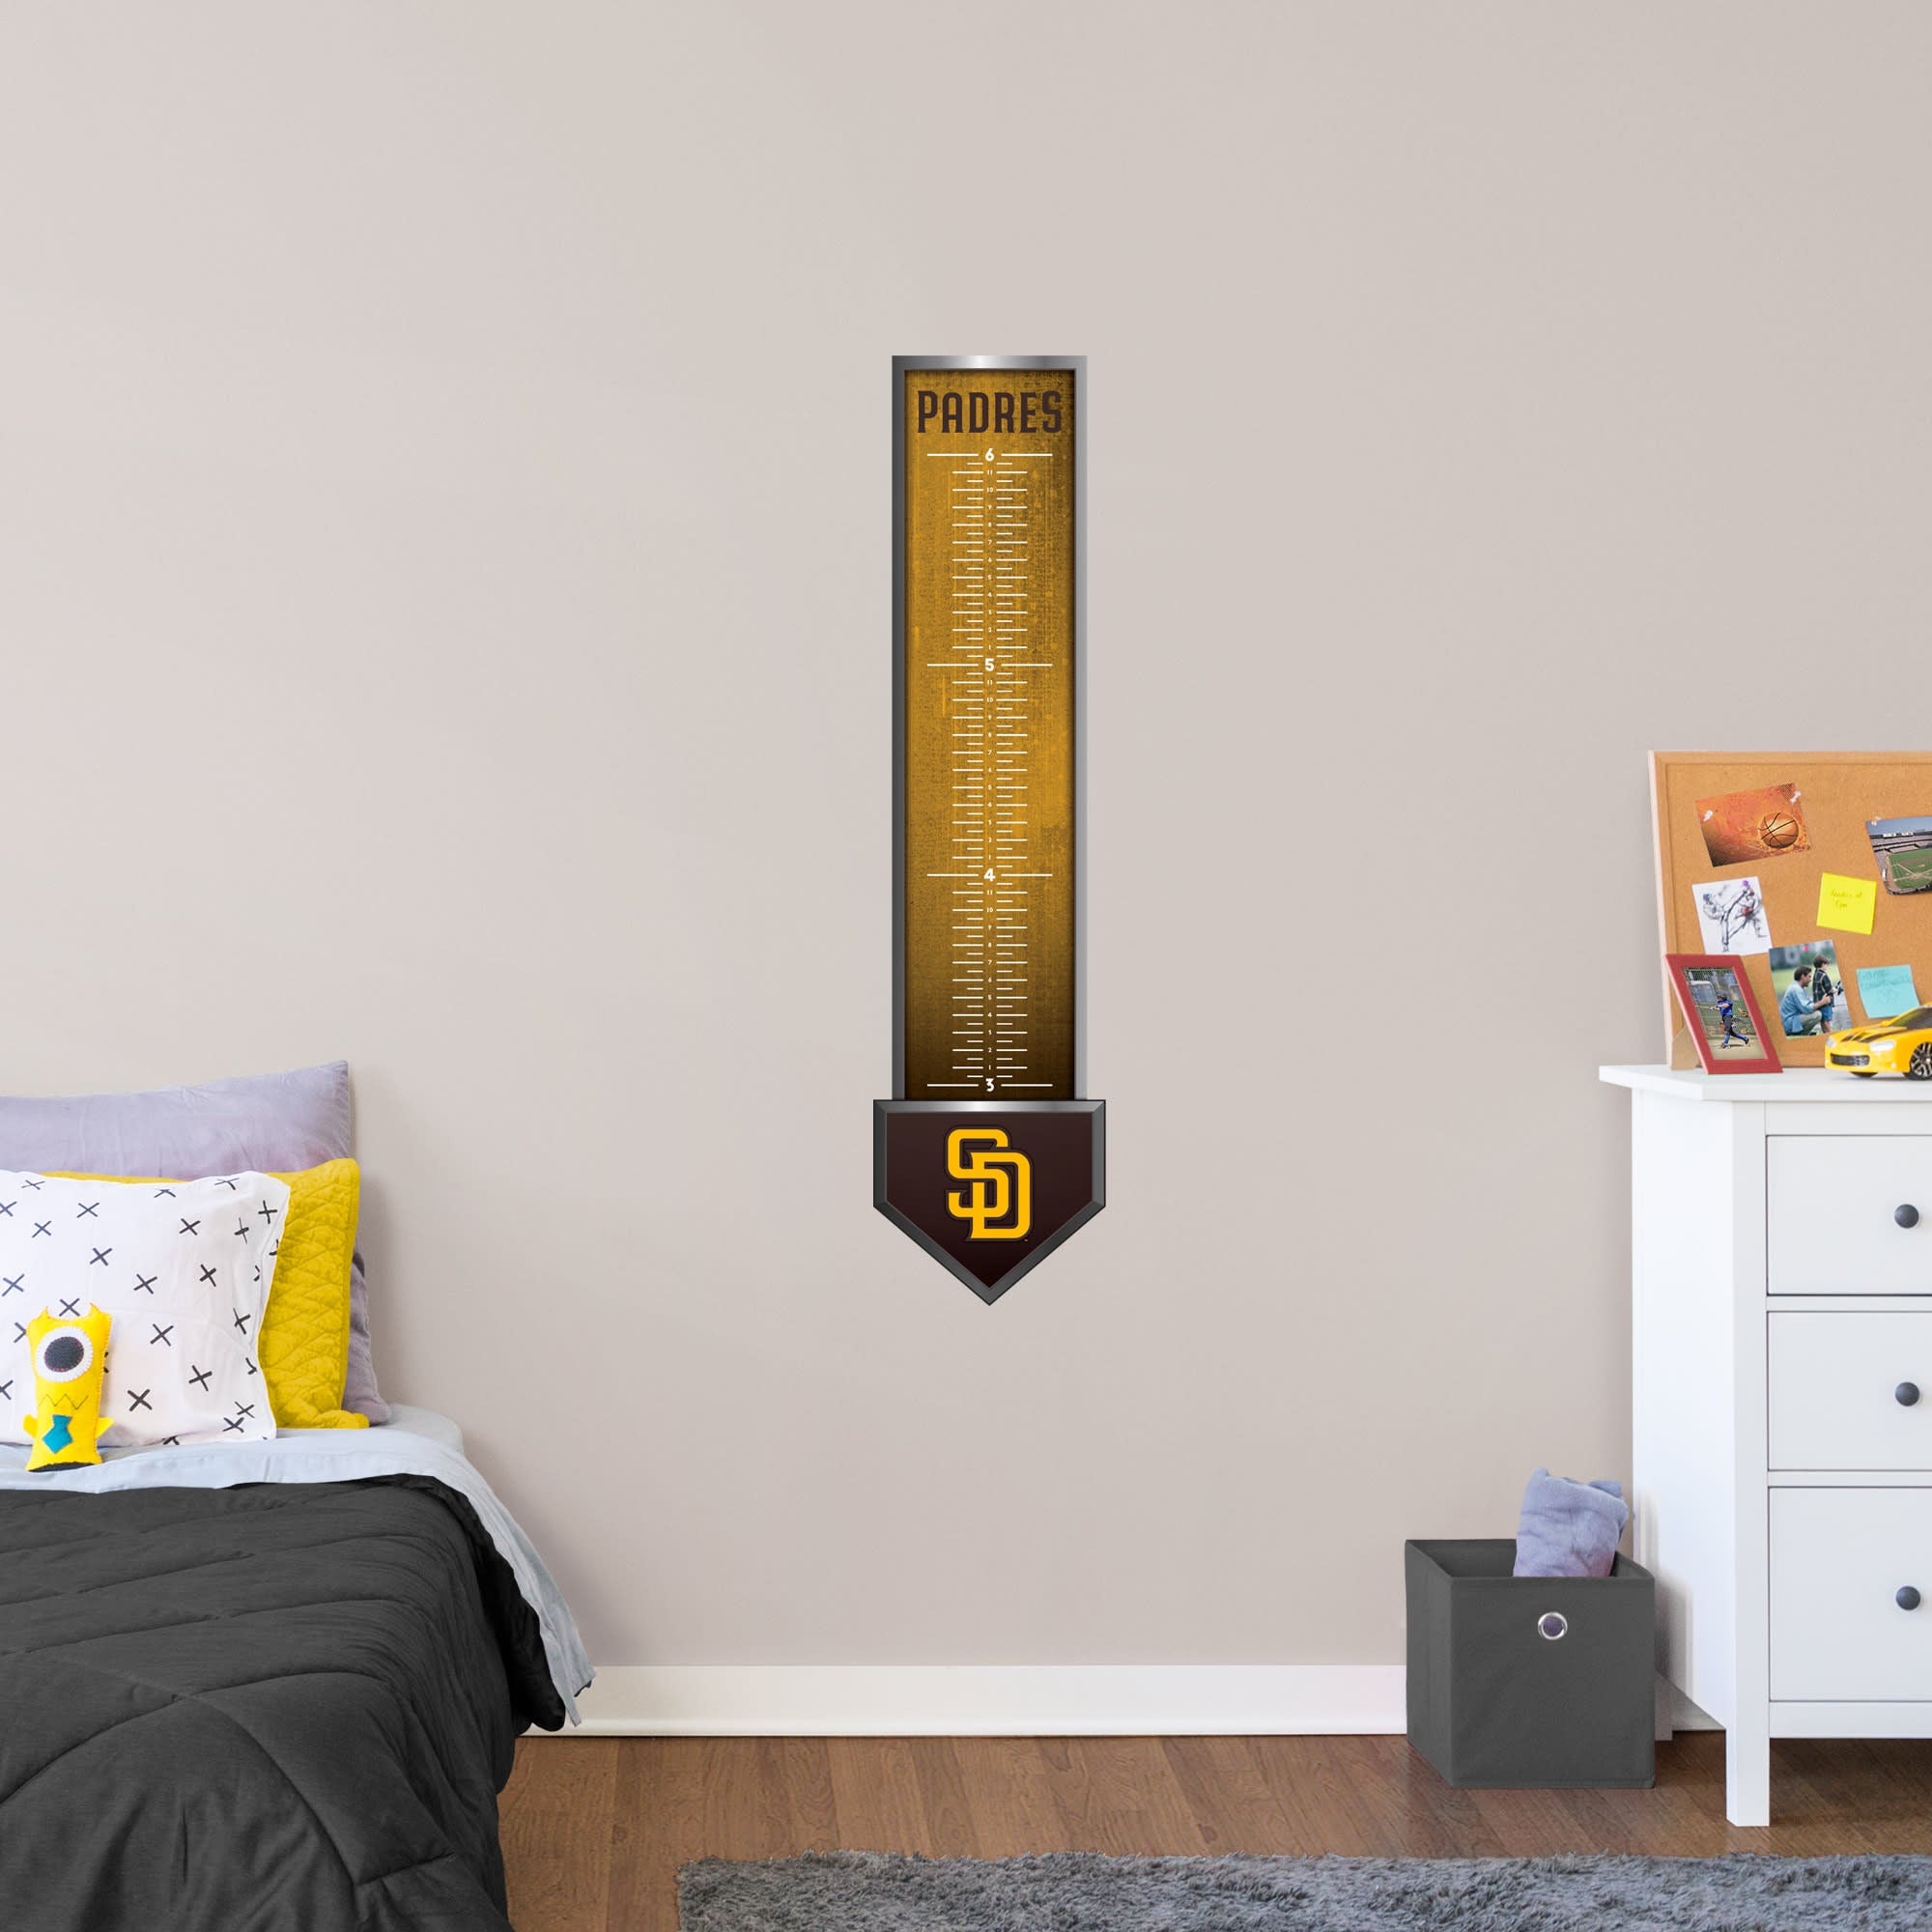 San Diego Padres: Growth Chart - Officially Licensed MLB Removable Wall Graphic 13.0"W x 54.0"H by Fathead | Vinyl